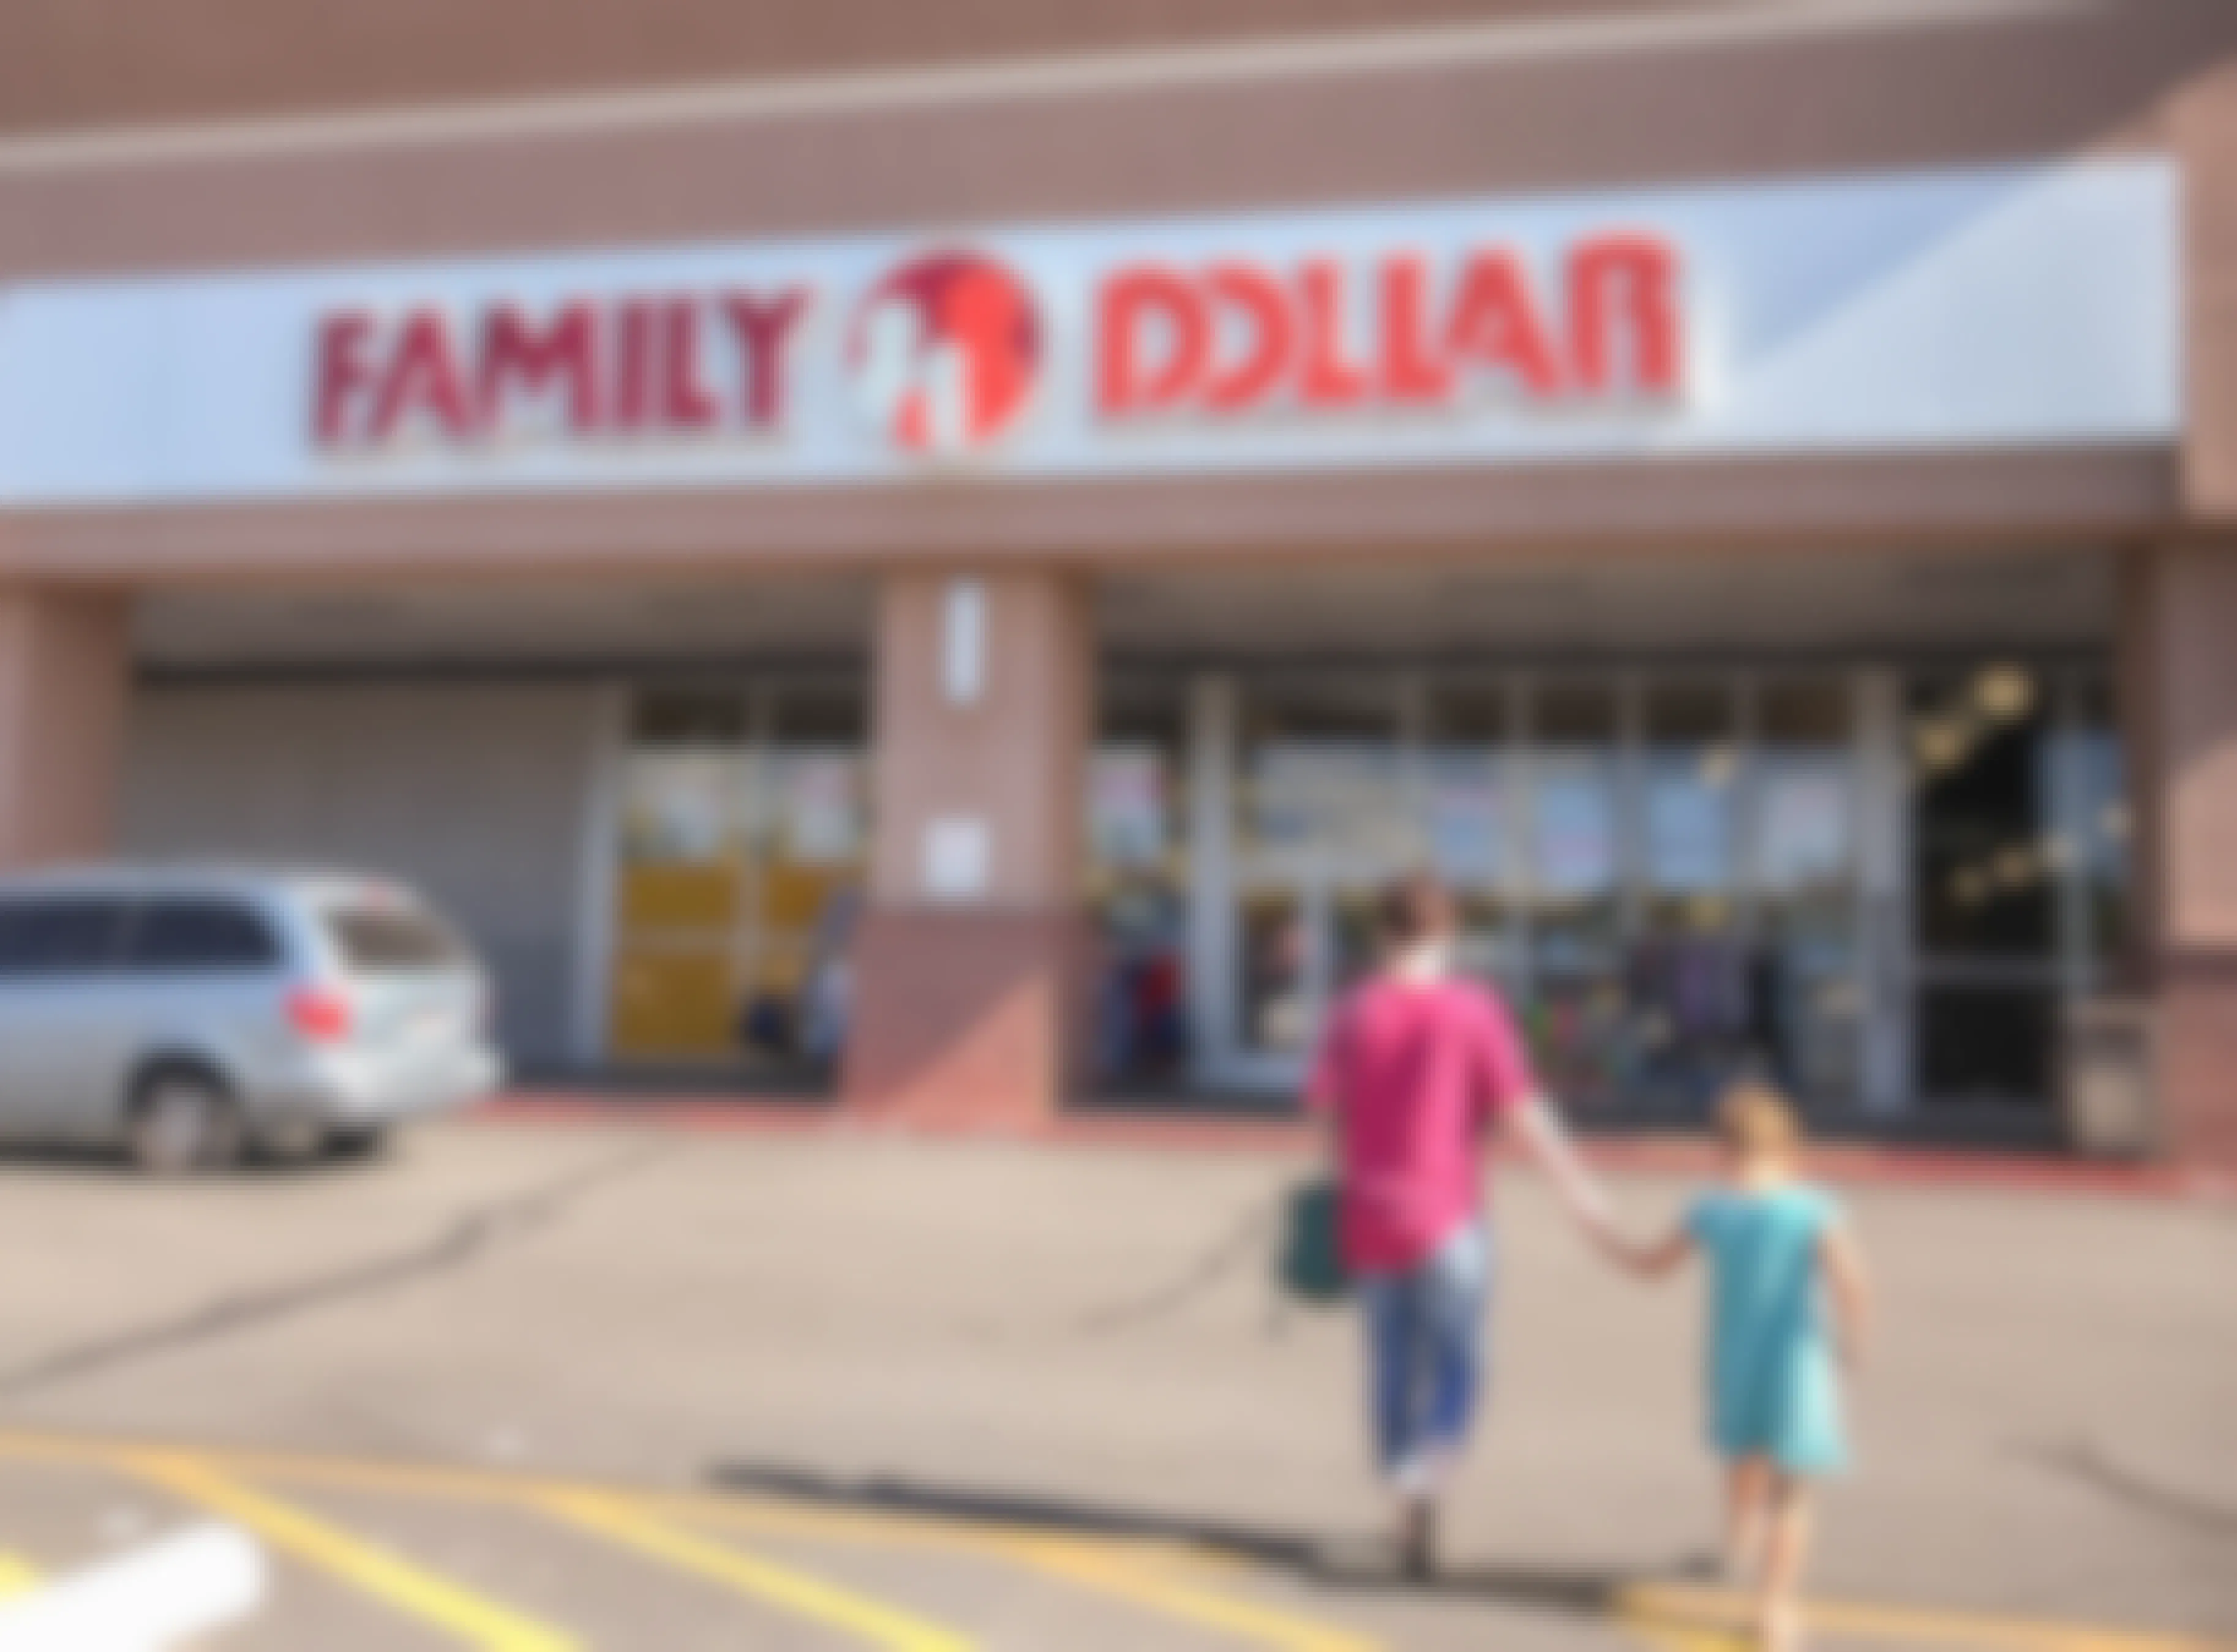 Woman holding hands with a child, walking into a Family Dollar